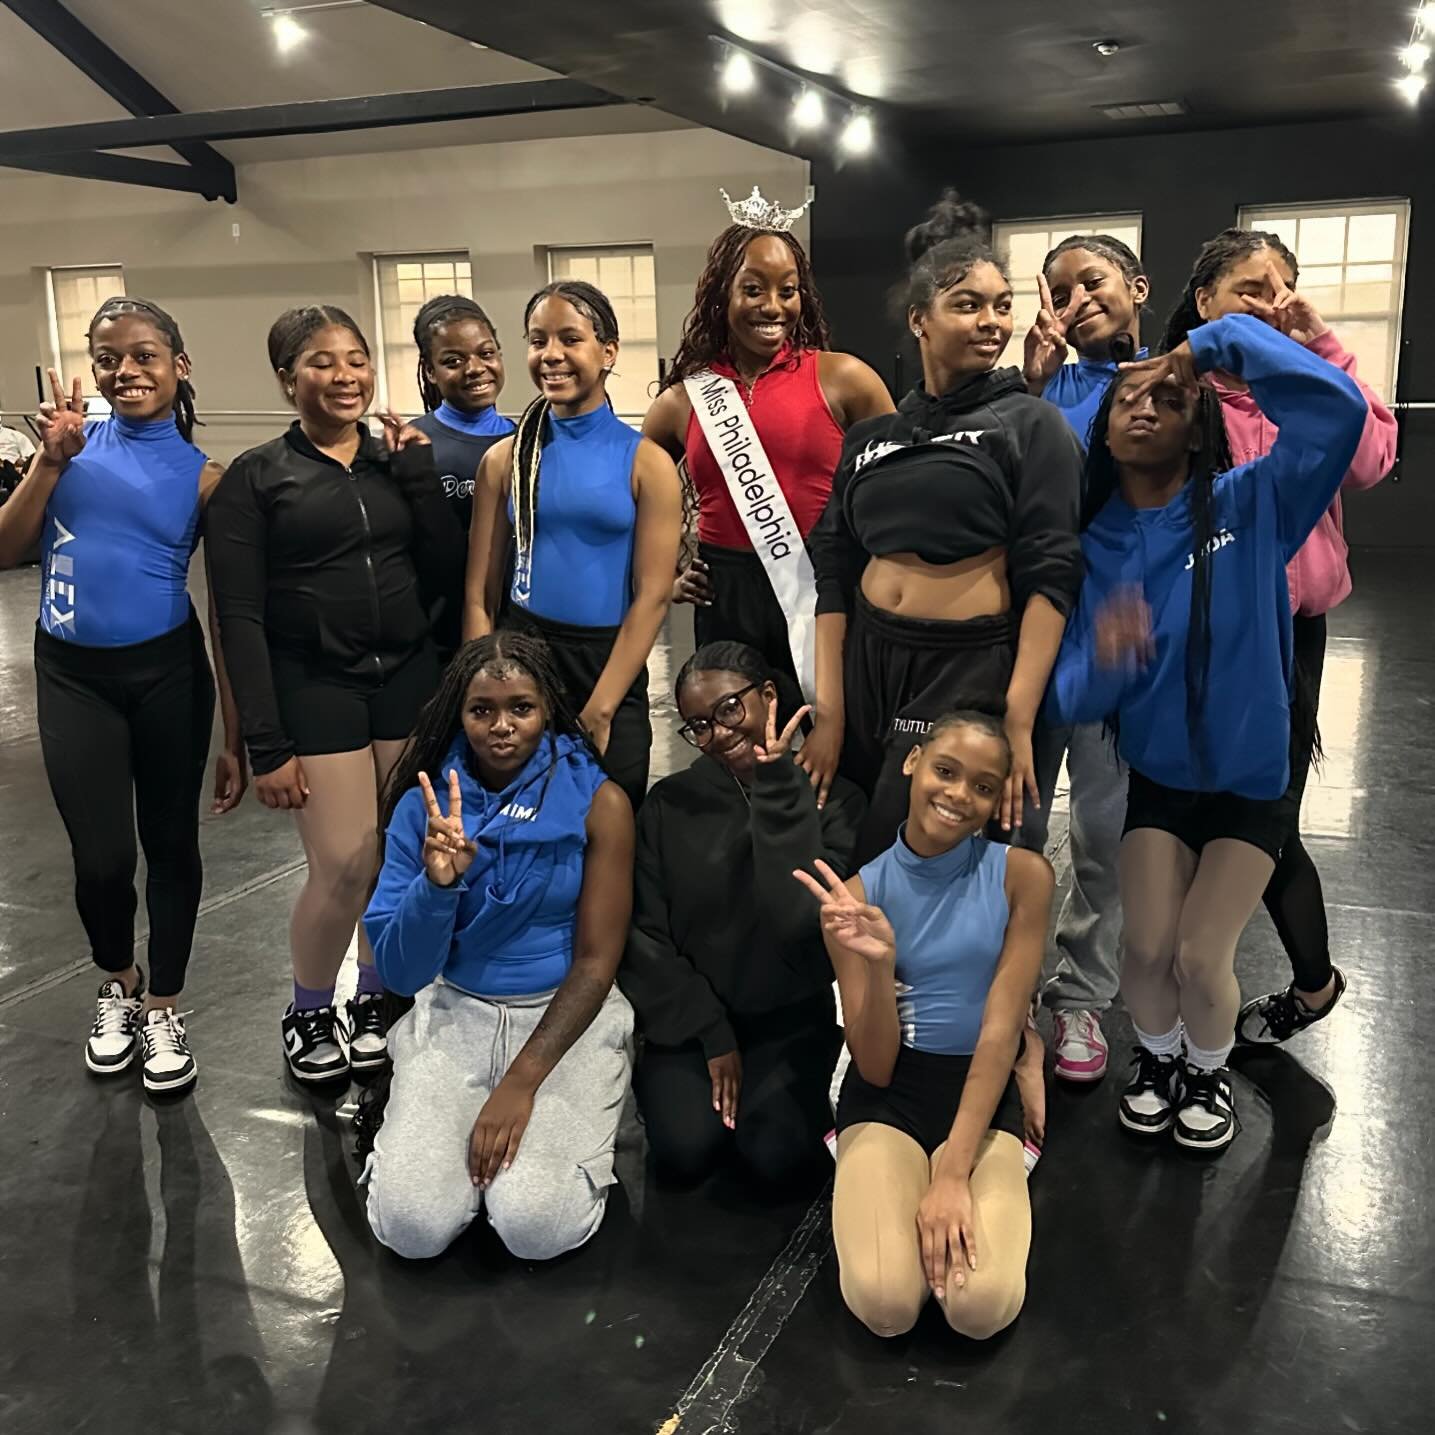 Hip Hop with Miss Philadelphia!!!! 

I had so much dancing with the girls at @alexjdreamcenter !

Fun fact, I met their teacher at the Harlem Globetrotters event back in February who is friends with our former Miss Philadelphia ❤️ Nia. I&rsquo;m so h